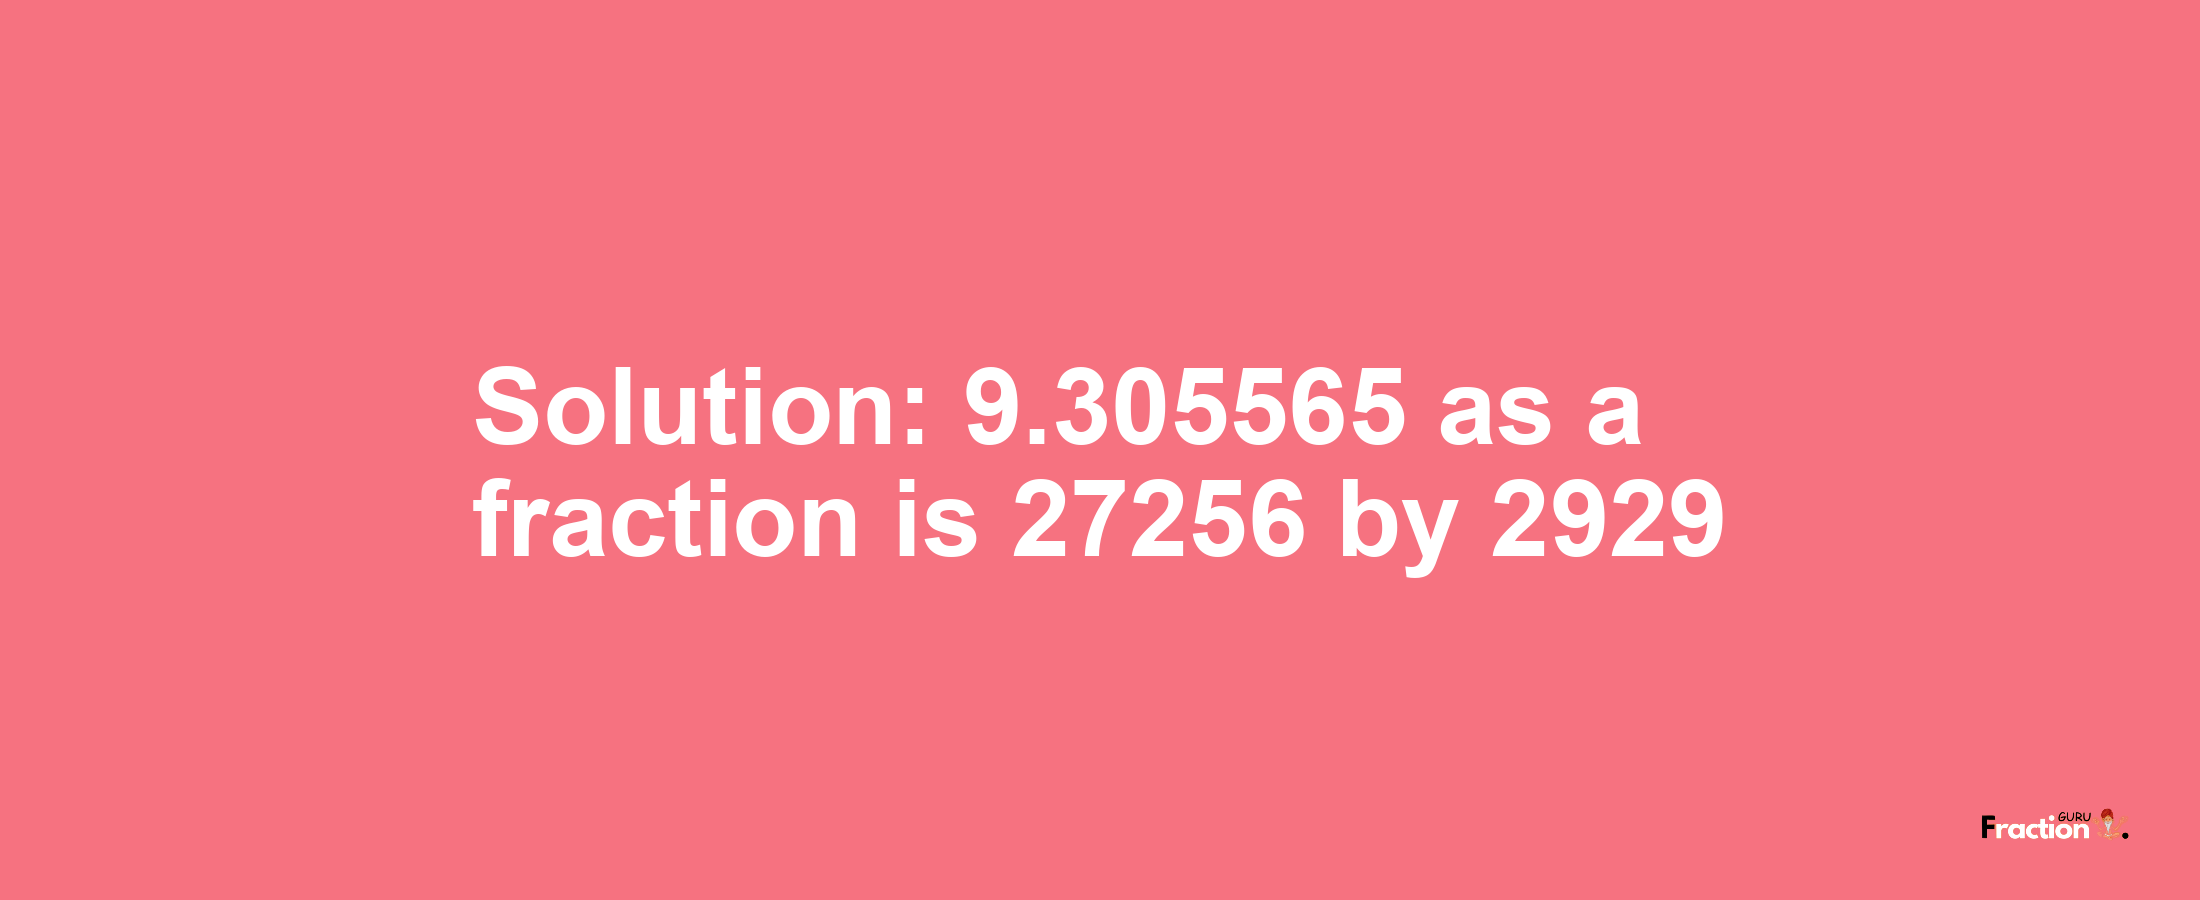 Solution:9.305565 as a fraction is 27256/2929